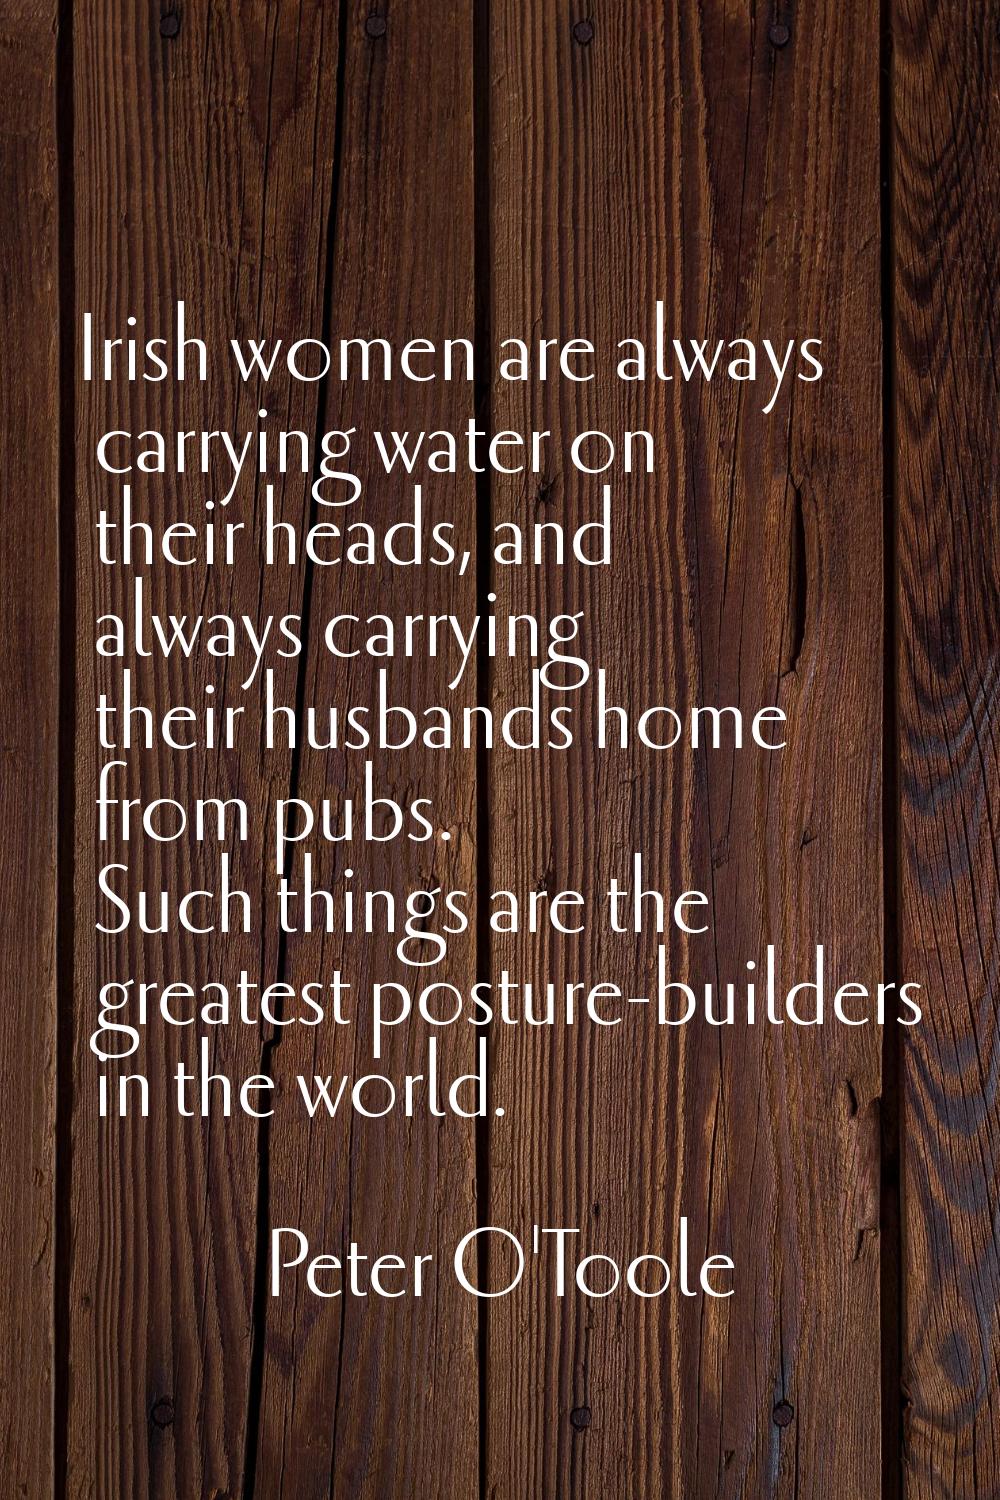 Irish women are always carrying water on their heads, and always carrying their husbands home from 